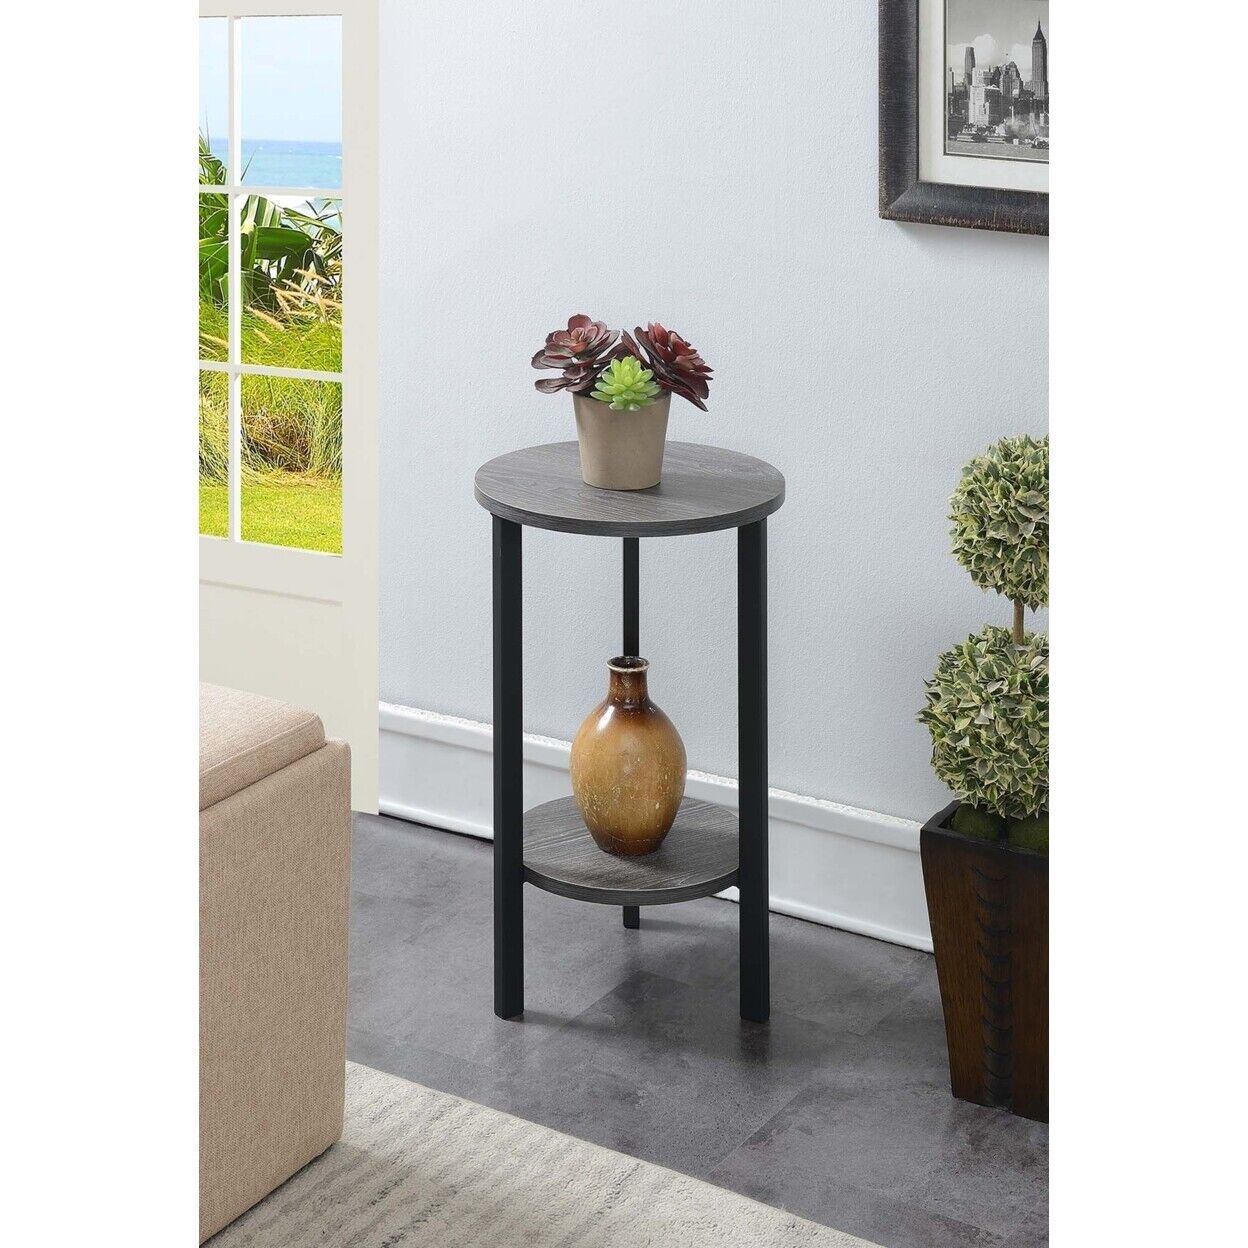 Graystone 24 Inch Plant Stand, Weathered Gray 95285427154 | Ebay Within 24 Inch Plant Stands (View 6 of 15)